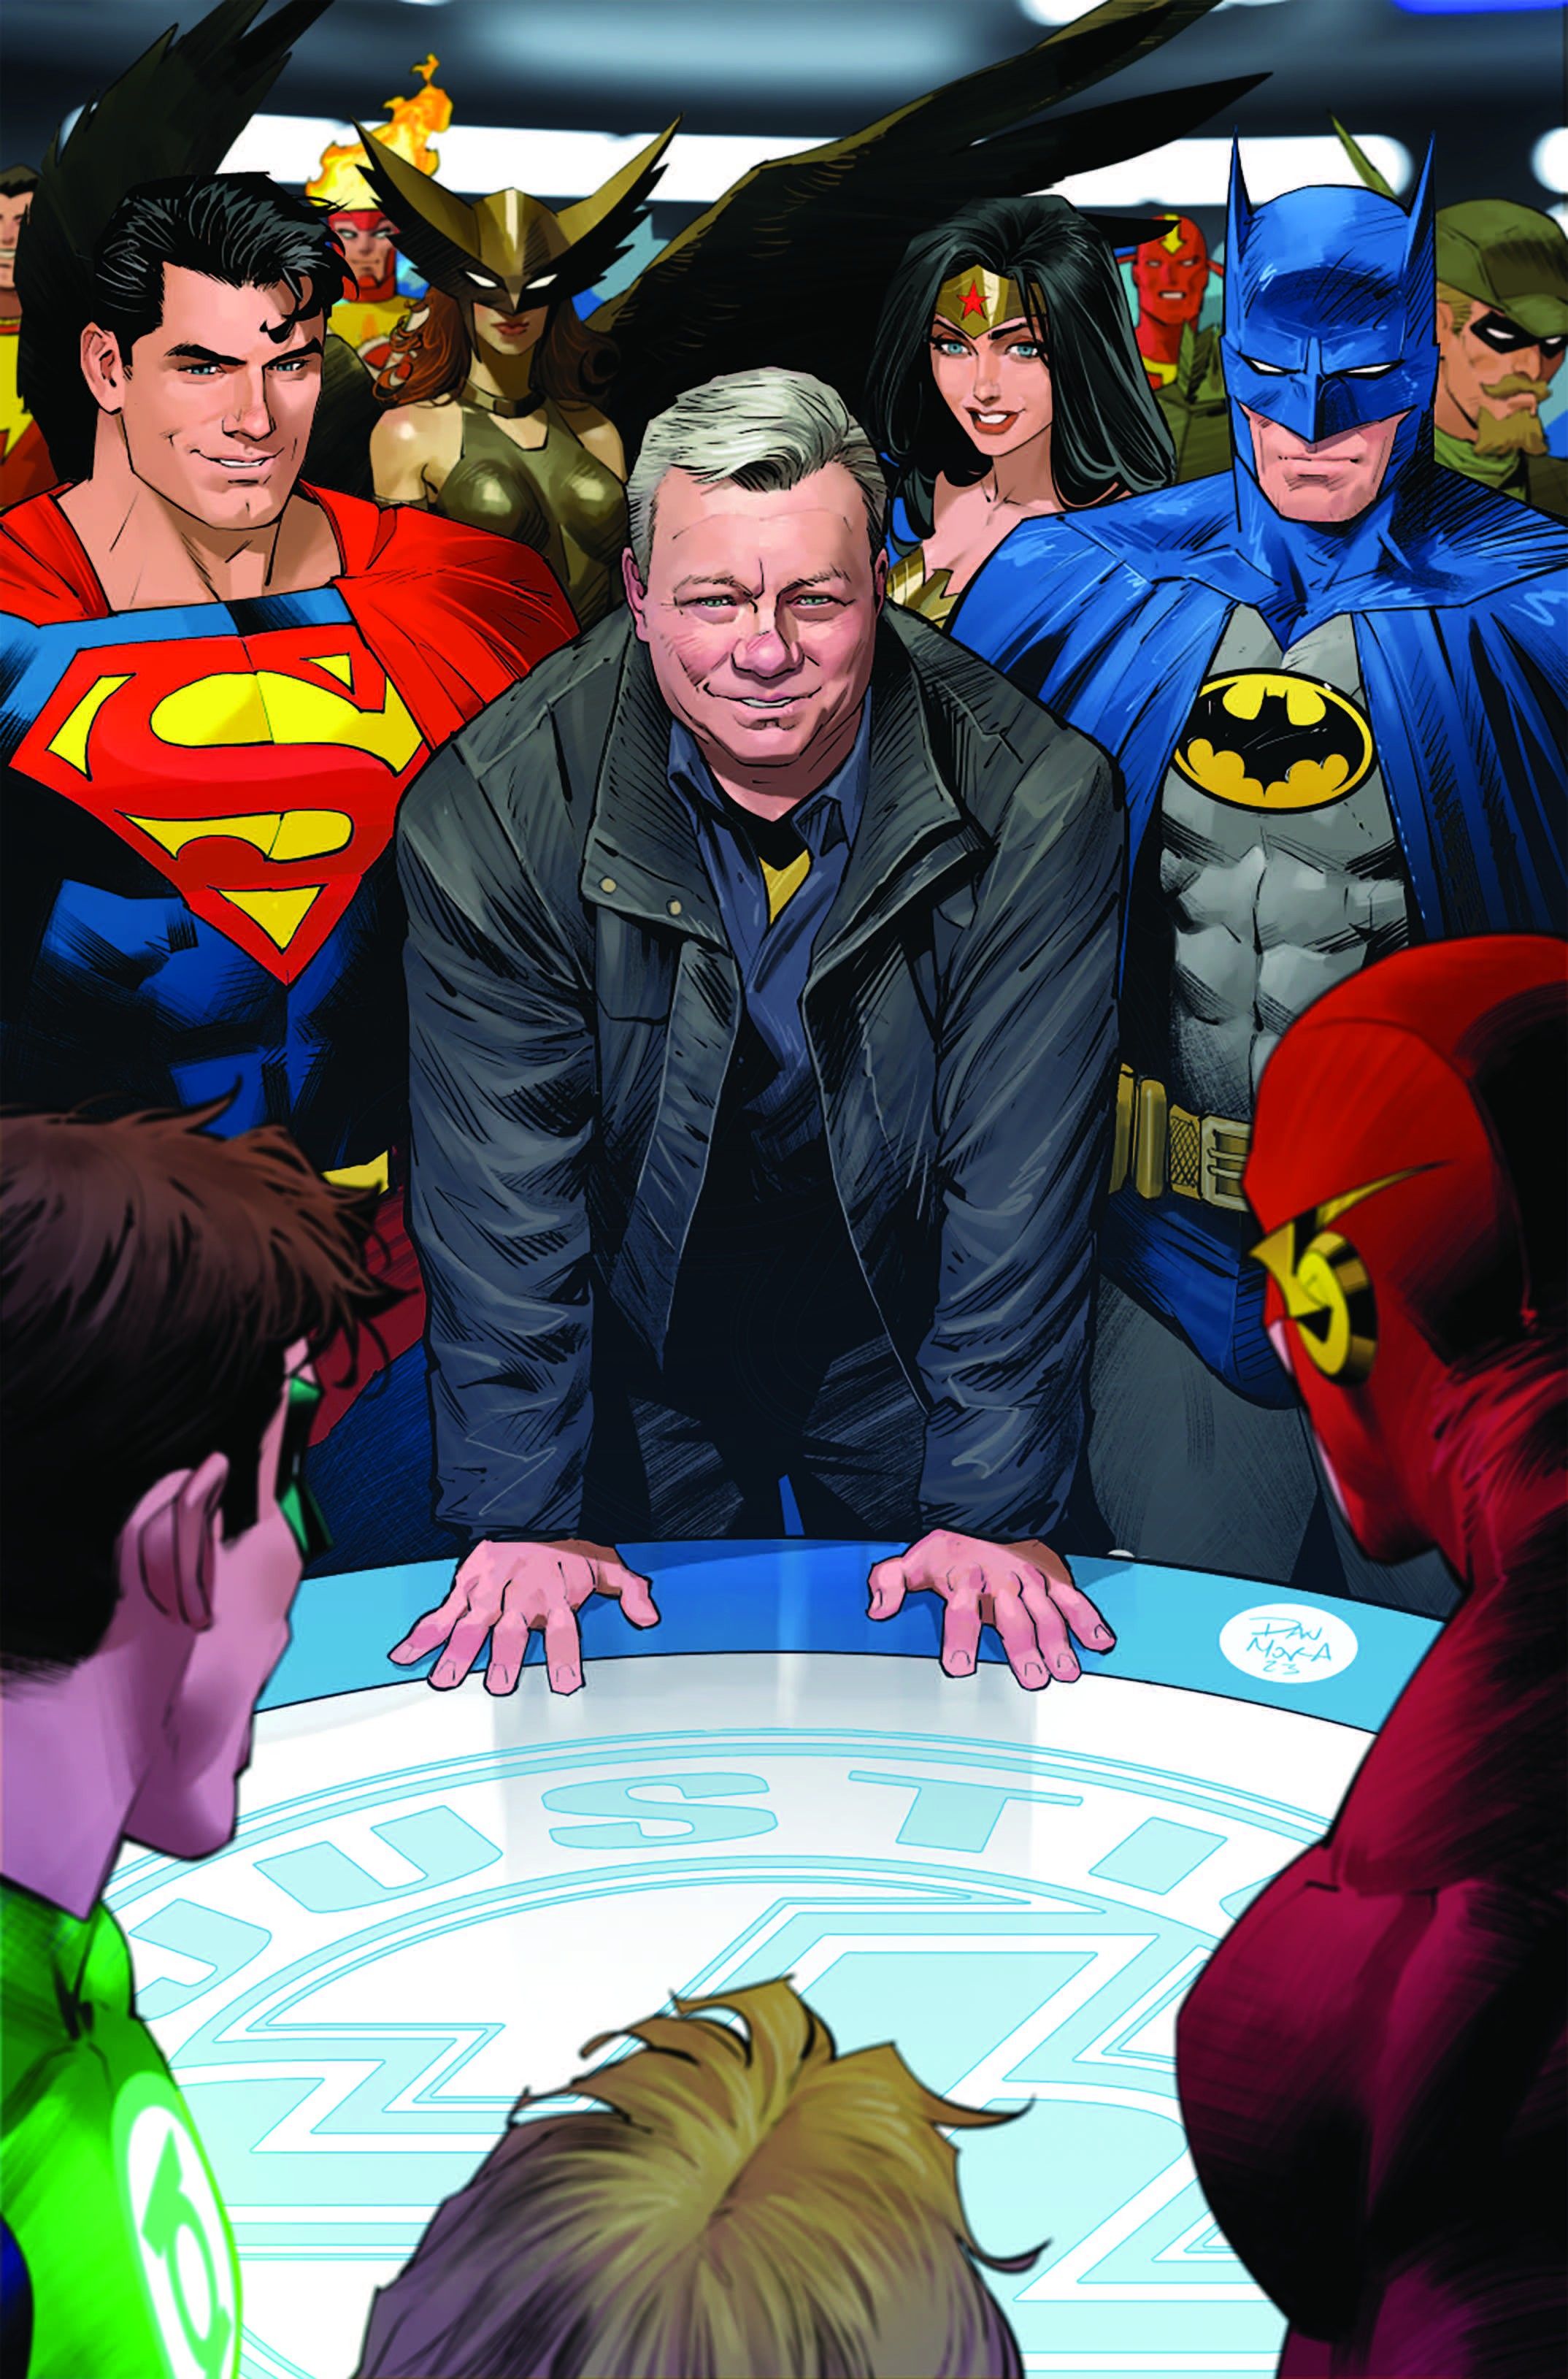 Image of William Shatner standing at the Justice League's meeting table, with members of the League, including Superman, Batman and Wonder Woman, standing around him.